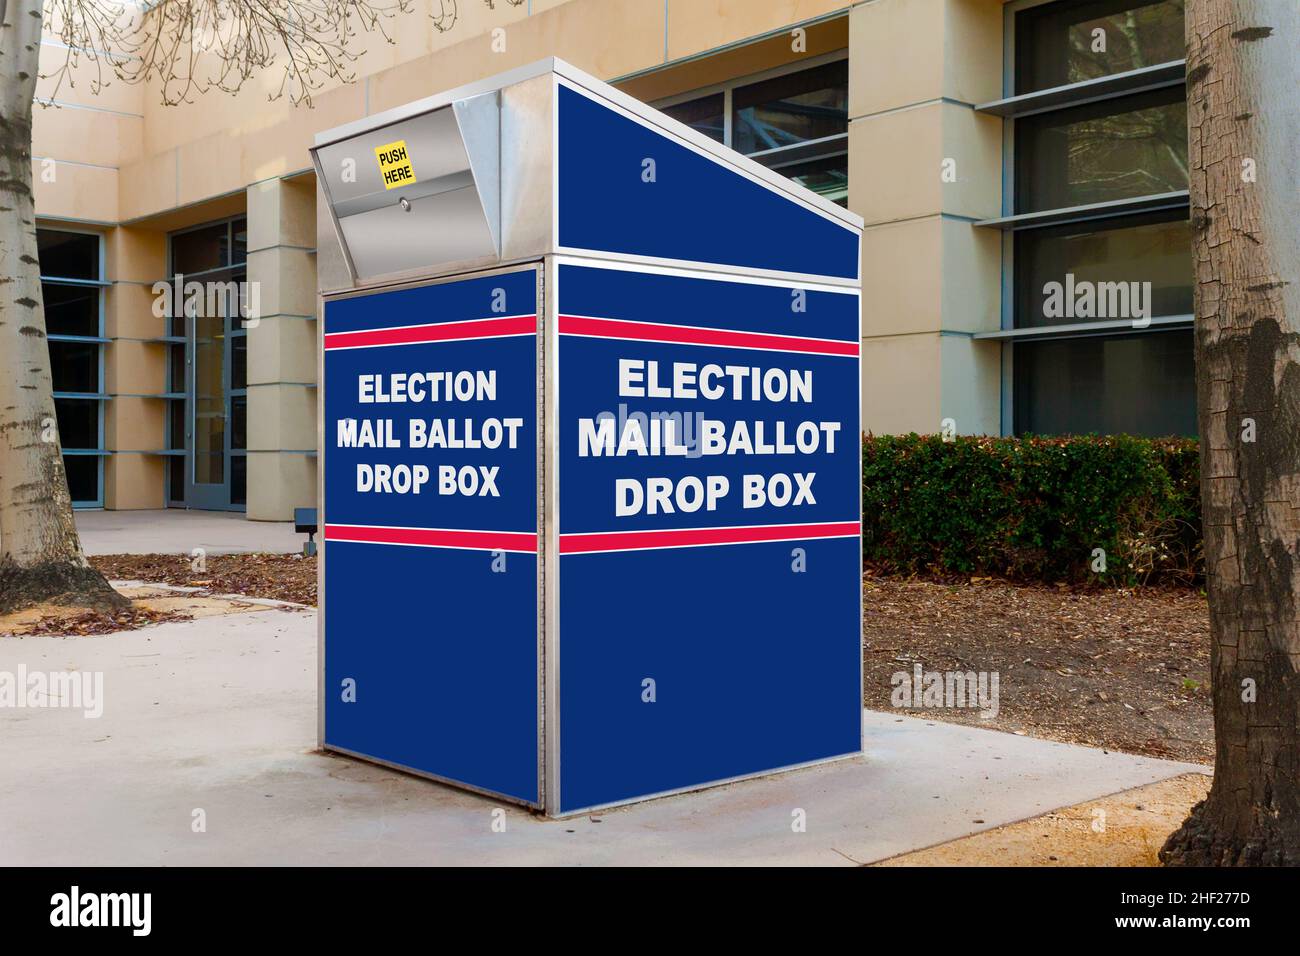 Election mail ballot drop box in red white and blue Stock Photo